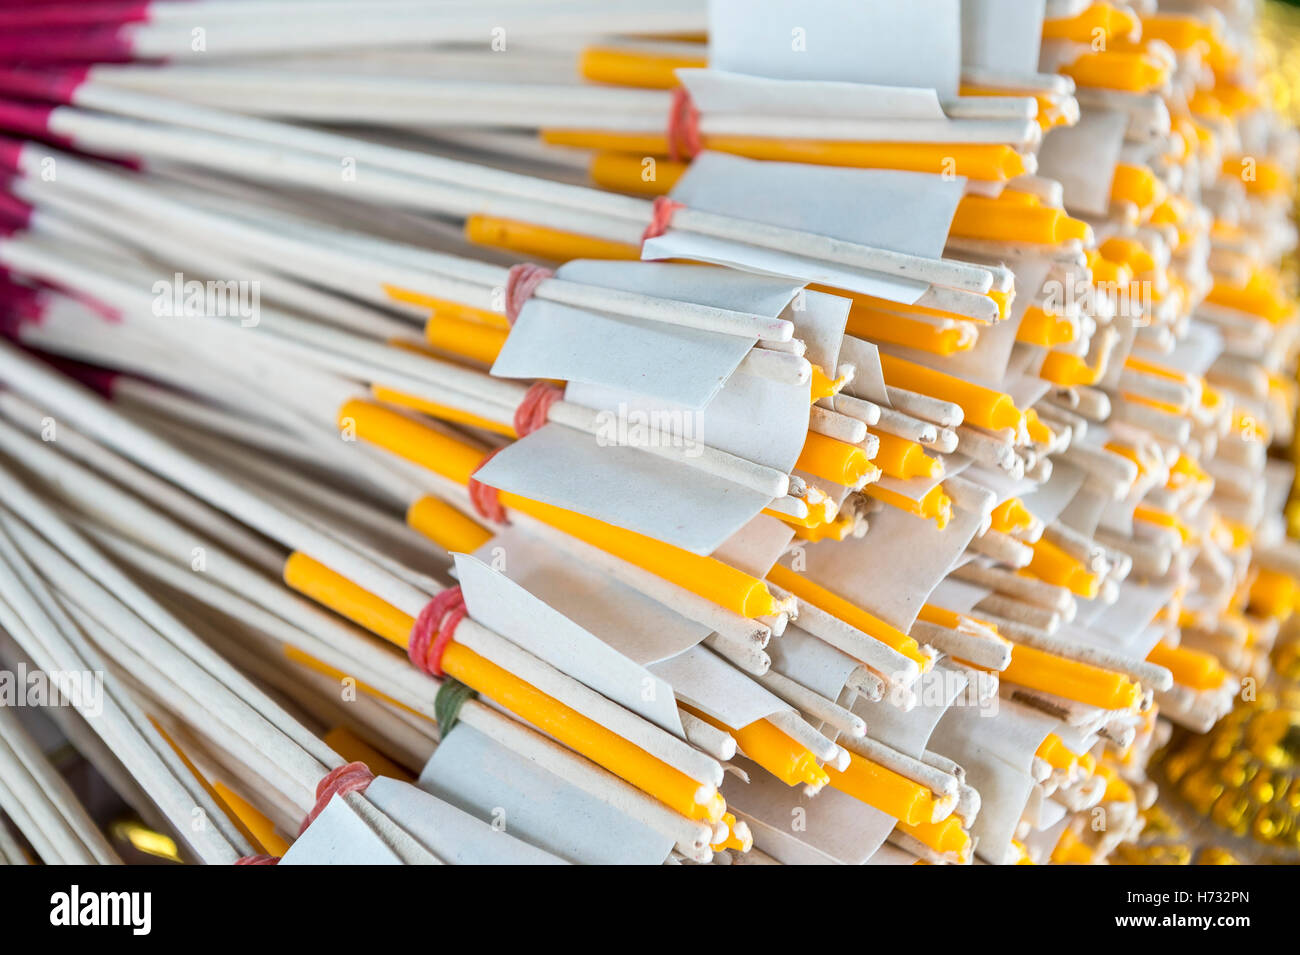 Bundle of red-tipped sticks of incense and yellow candles wrapped in white paper bundled and stacked in a Buddhist shrine Stock Photo